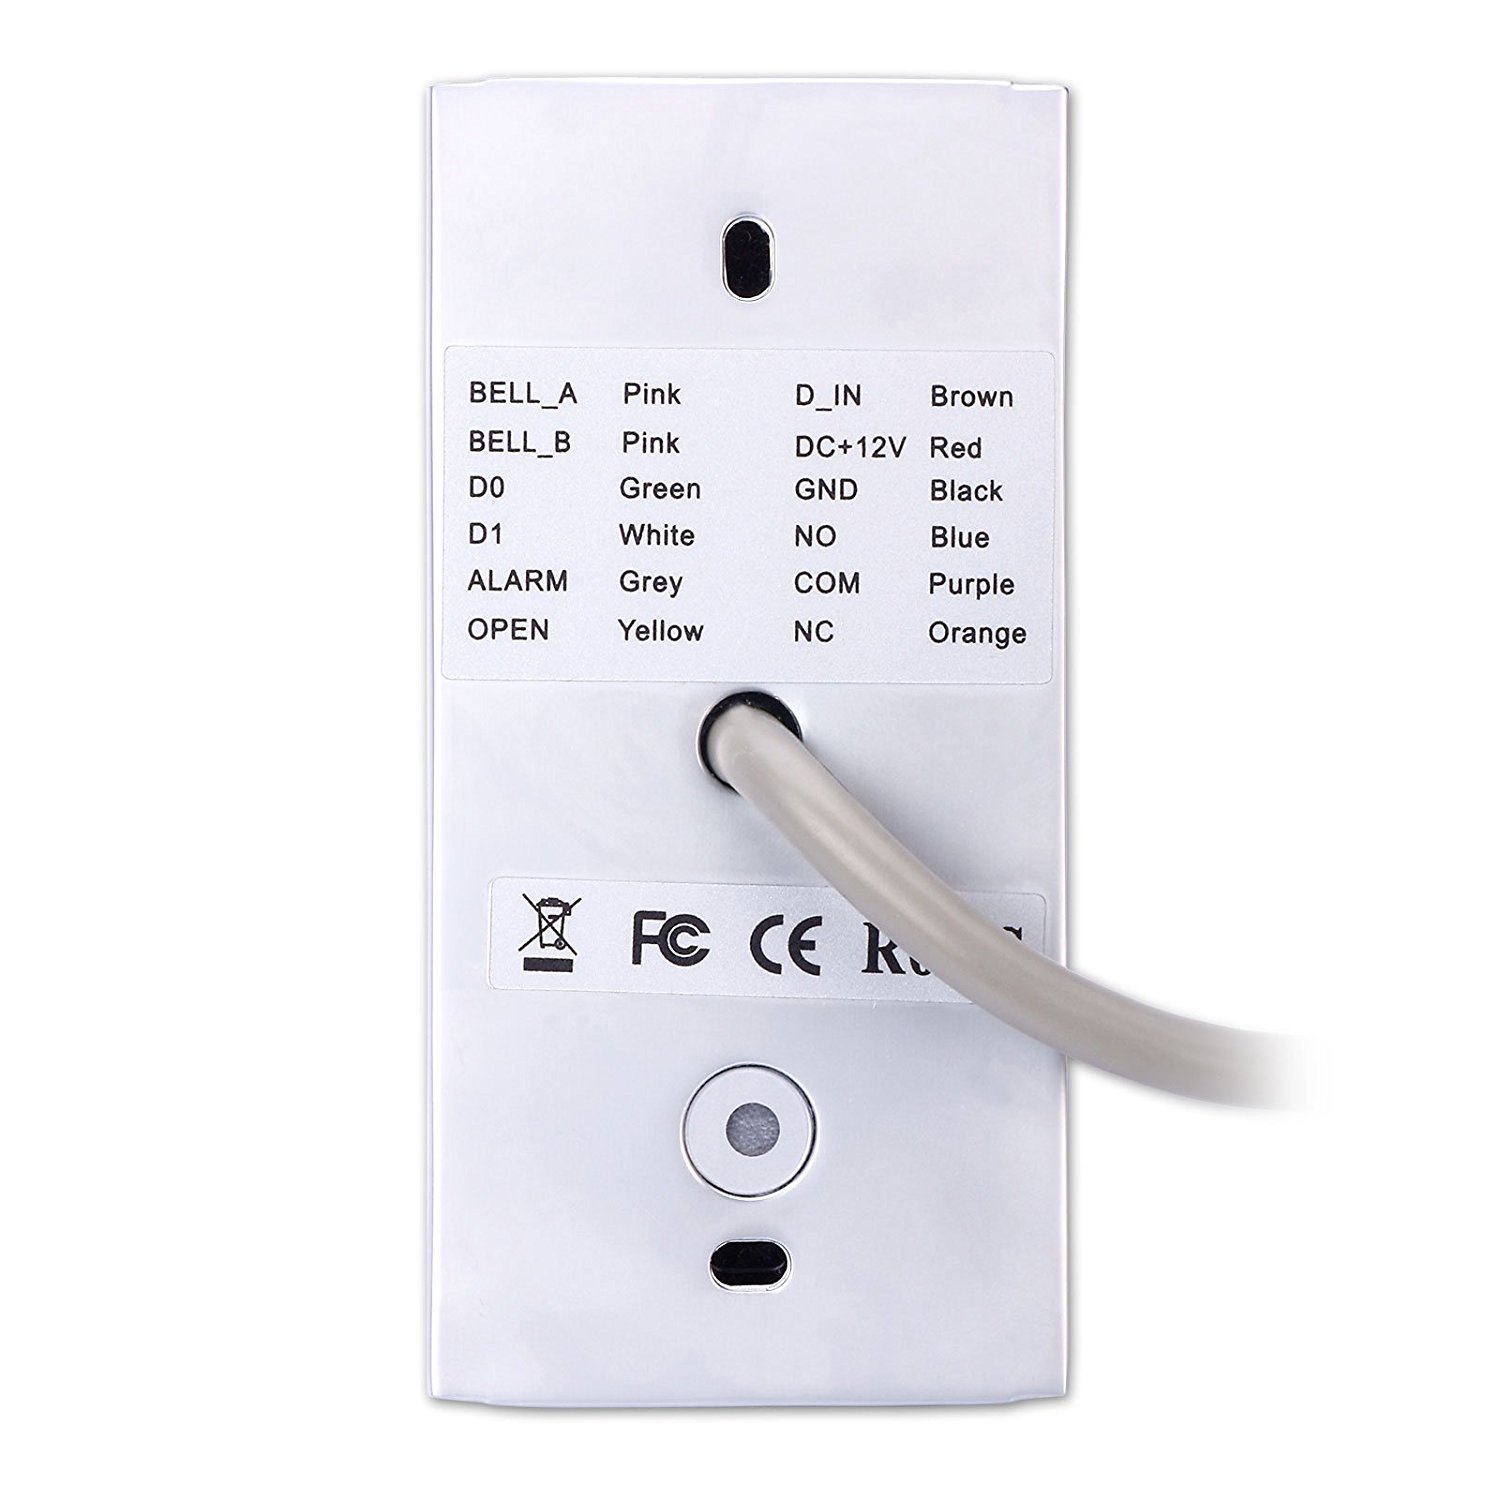 Waterproof Metal Case Swipe RFID Card Reader Keypads Access Control Systems For Outdoor